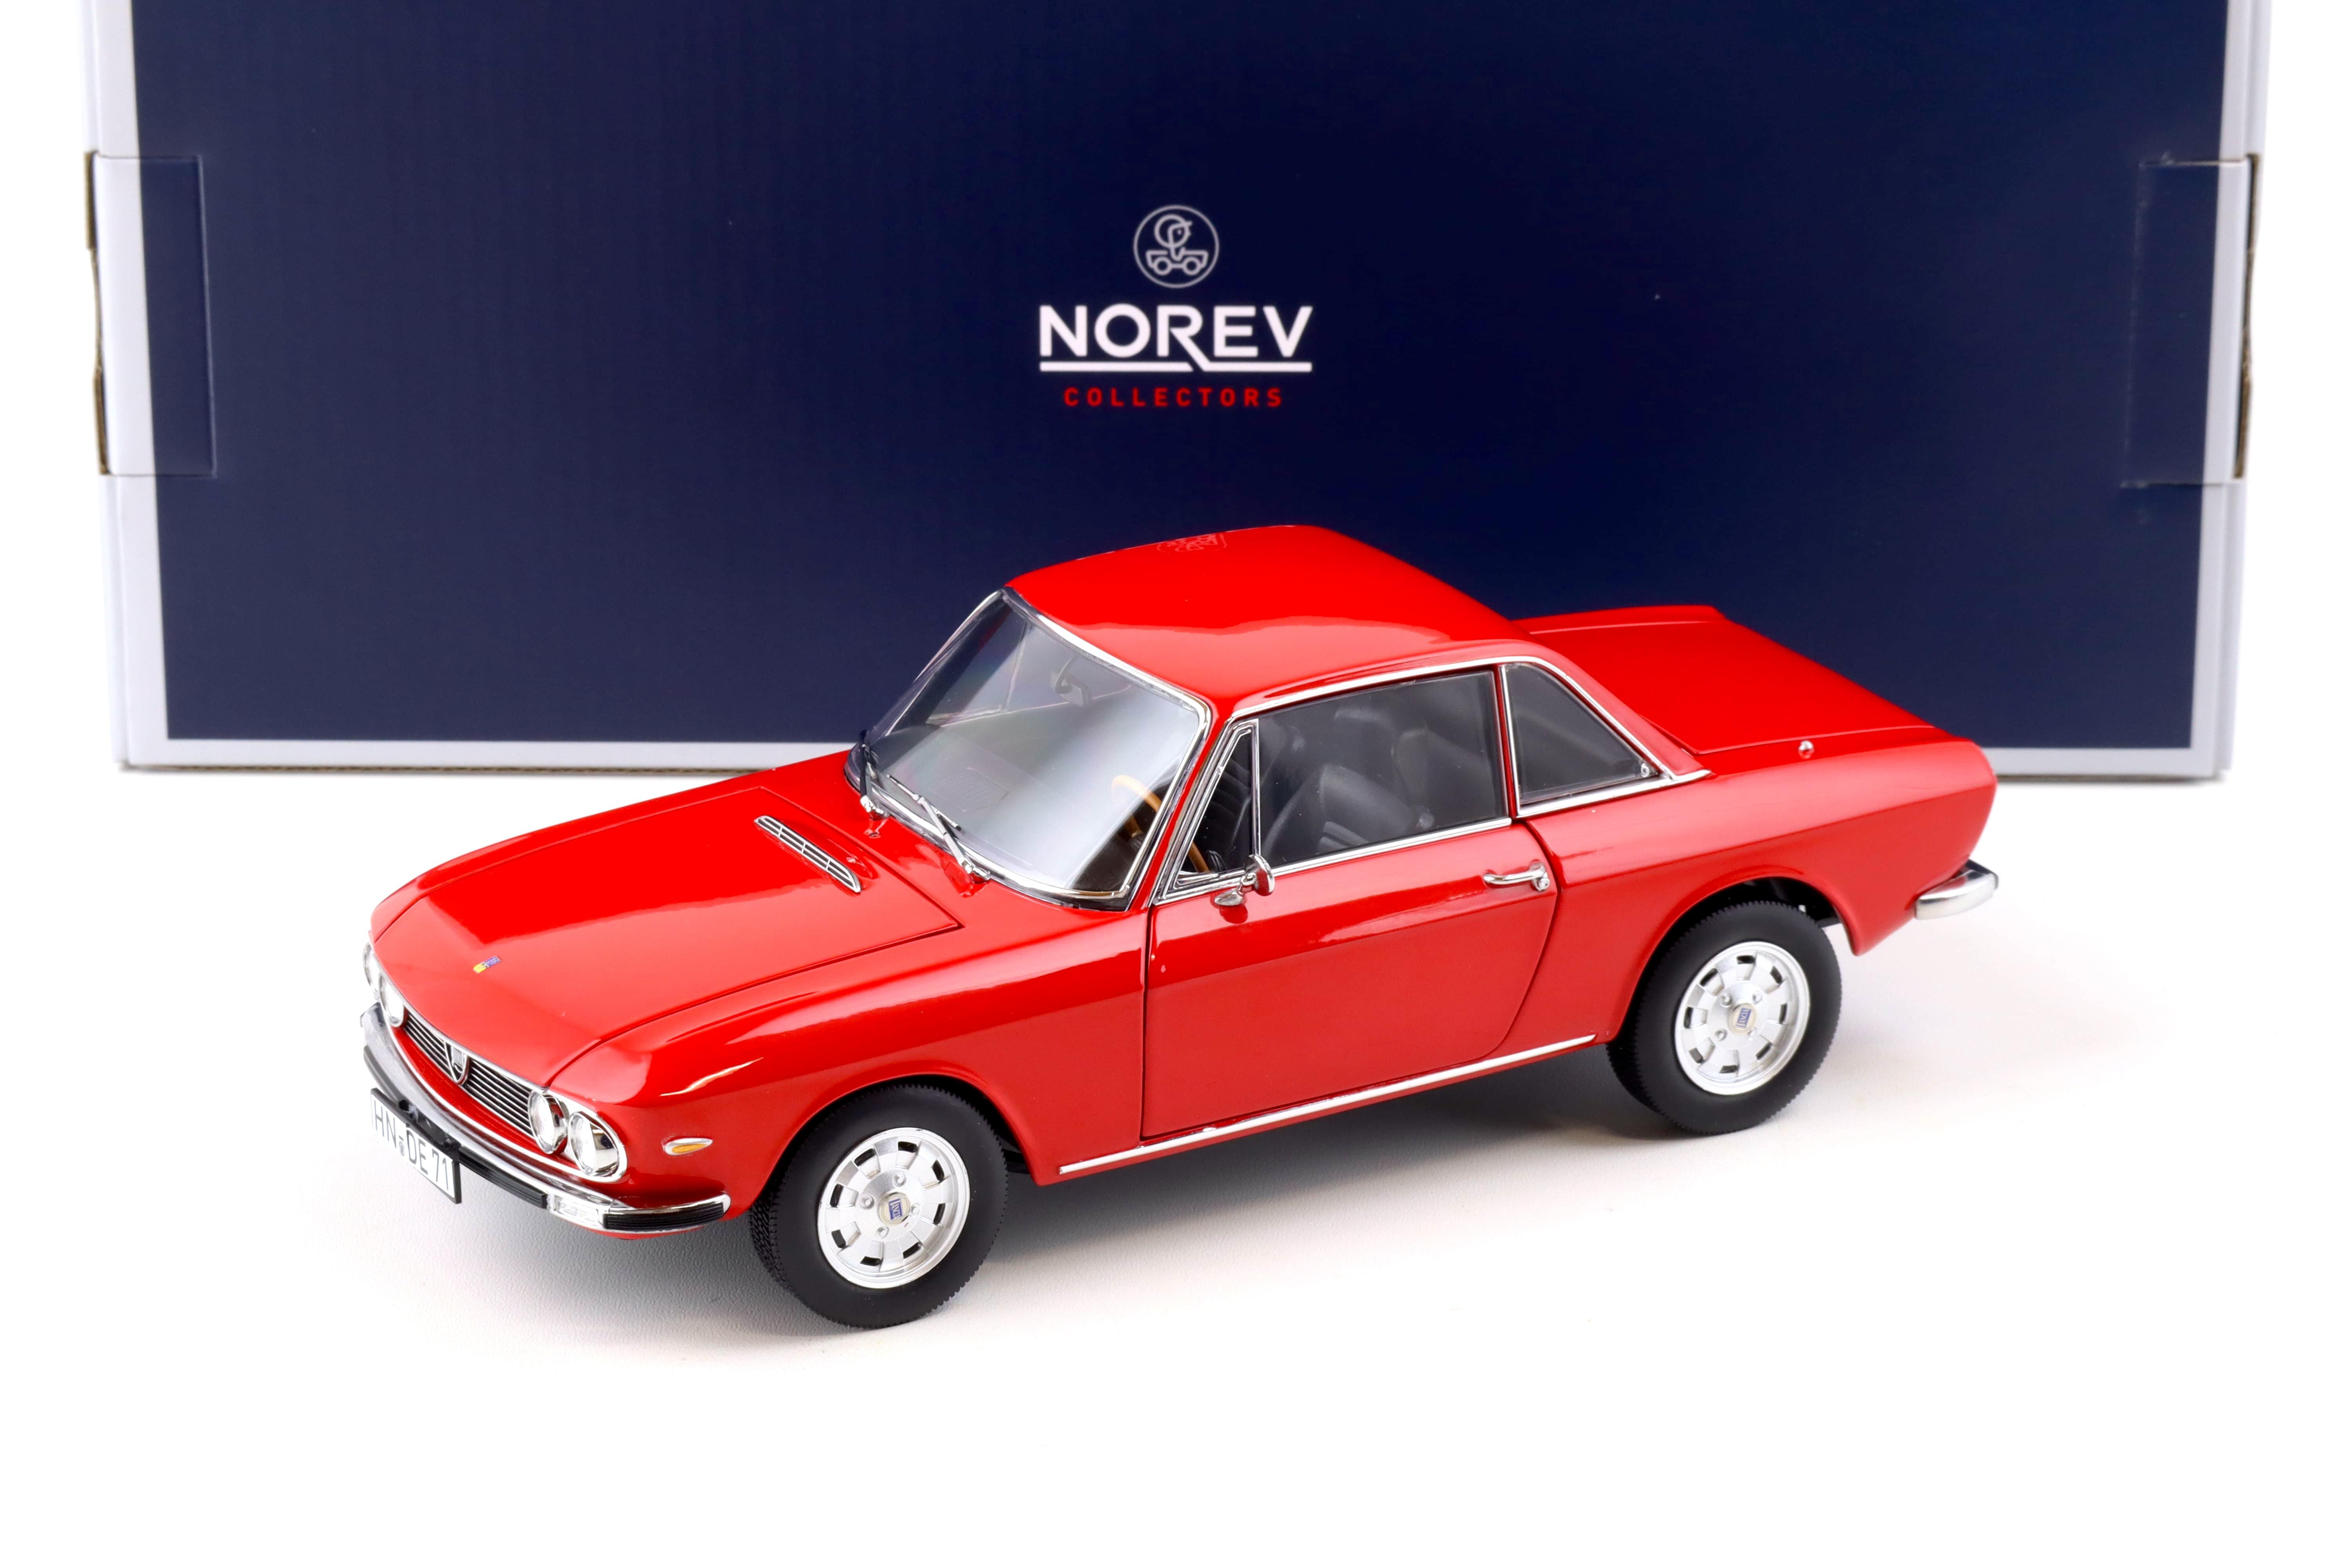 1:18 Norev Lancia Fulvia 1600 HF Lusso 1971 red - Limited Edition 1000 pcs.